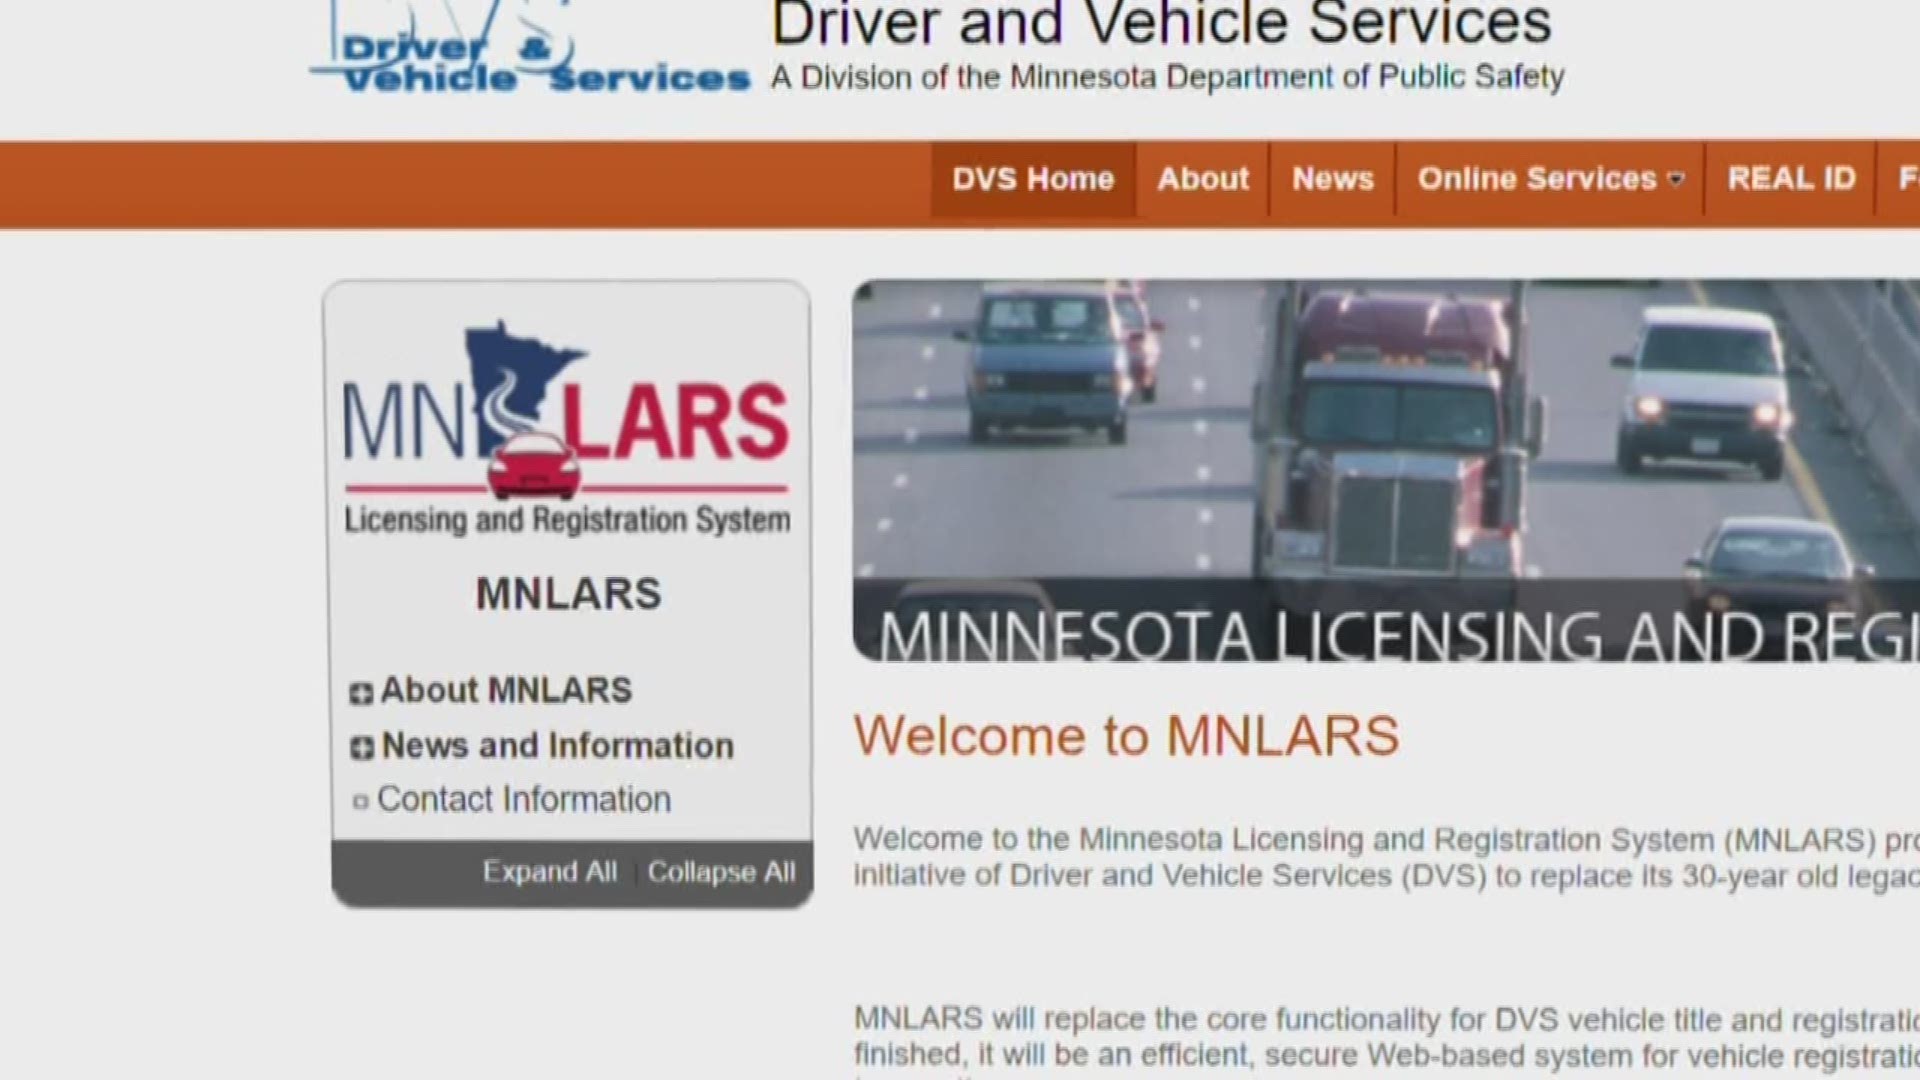 A newly released report by the legislative auditor shows issues with Minnesota's MNLARS vehicle registration system may have left some vehicle owners paying too much or too little for their annual vehicle registration taxes. https://kare11.tv/2OQu2oe